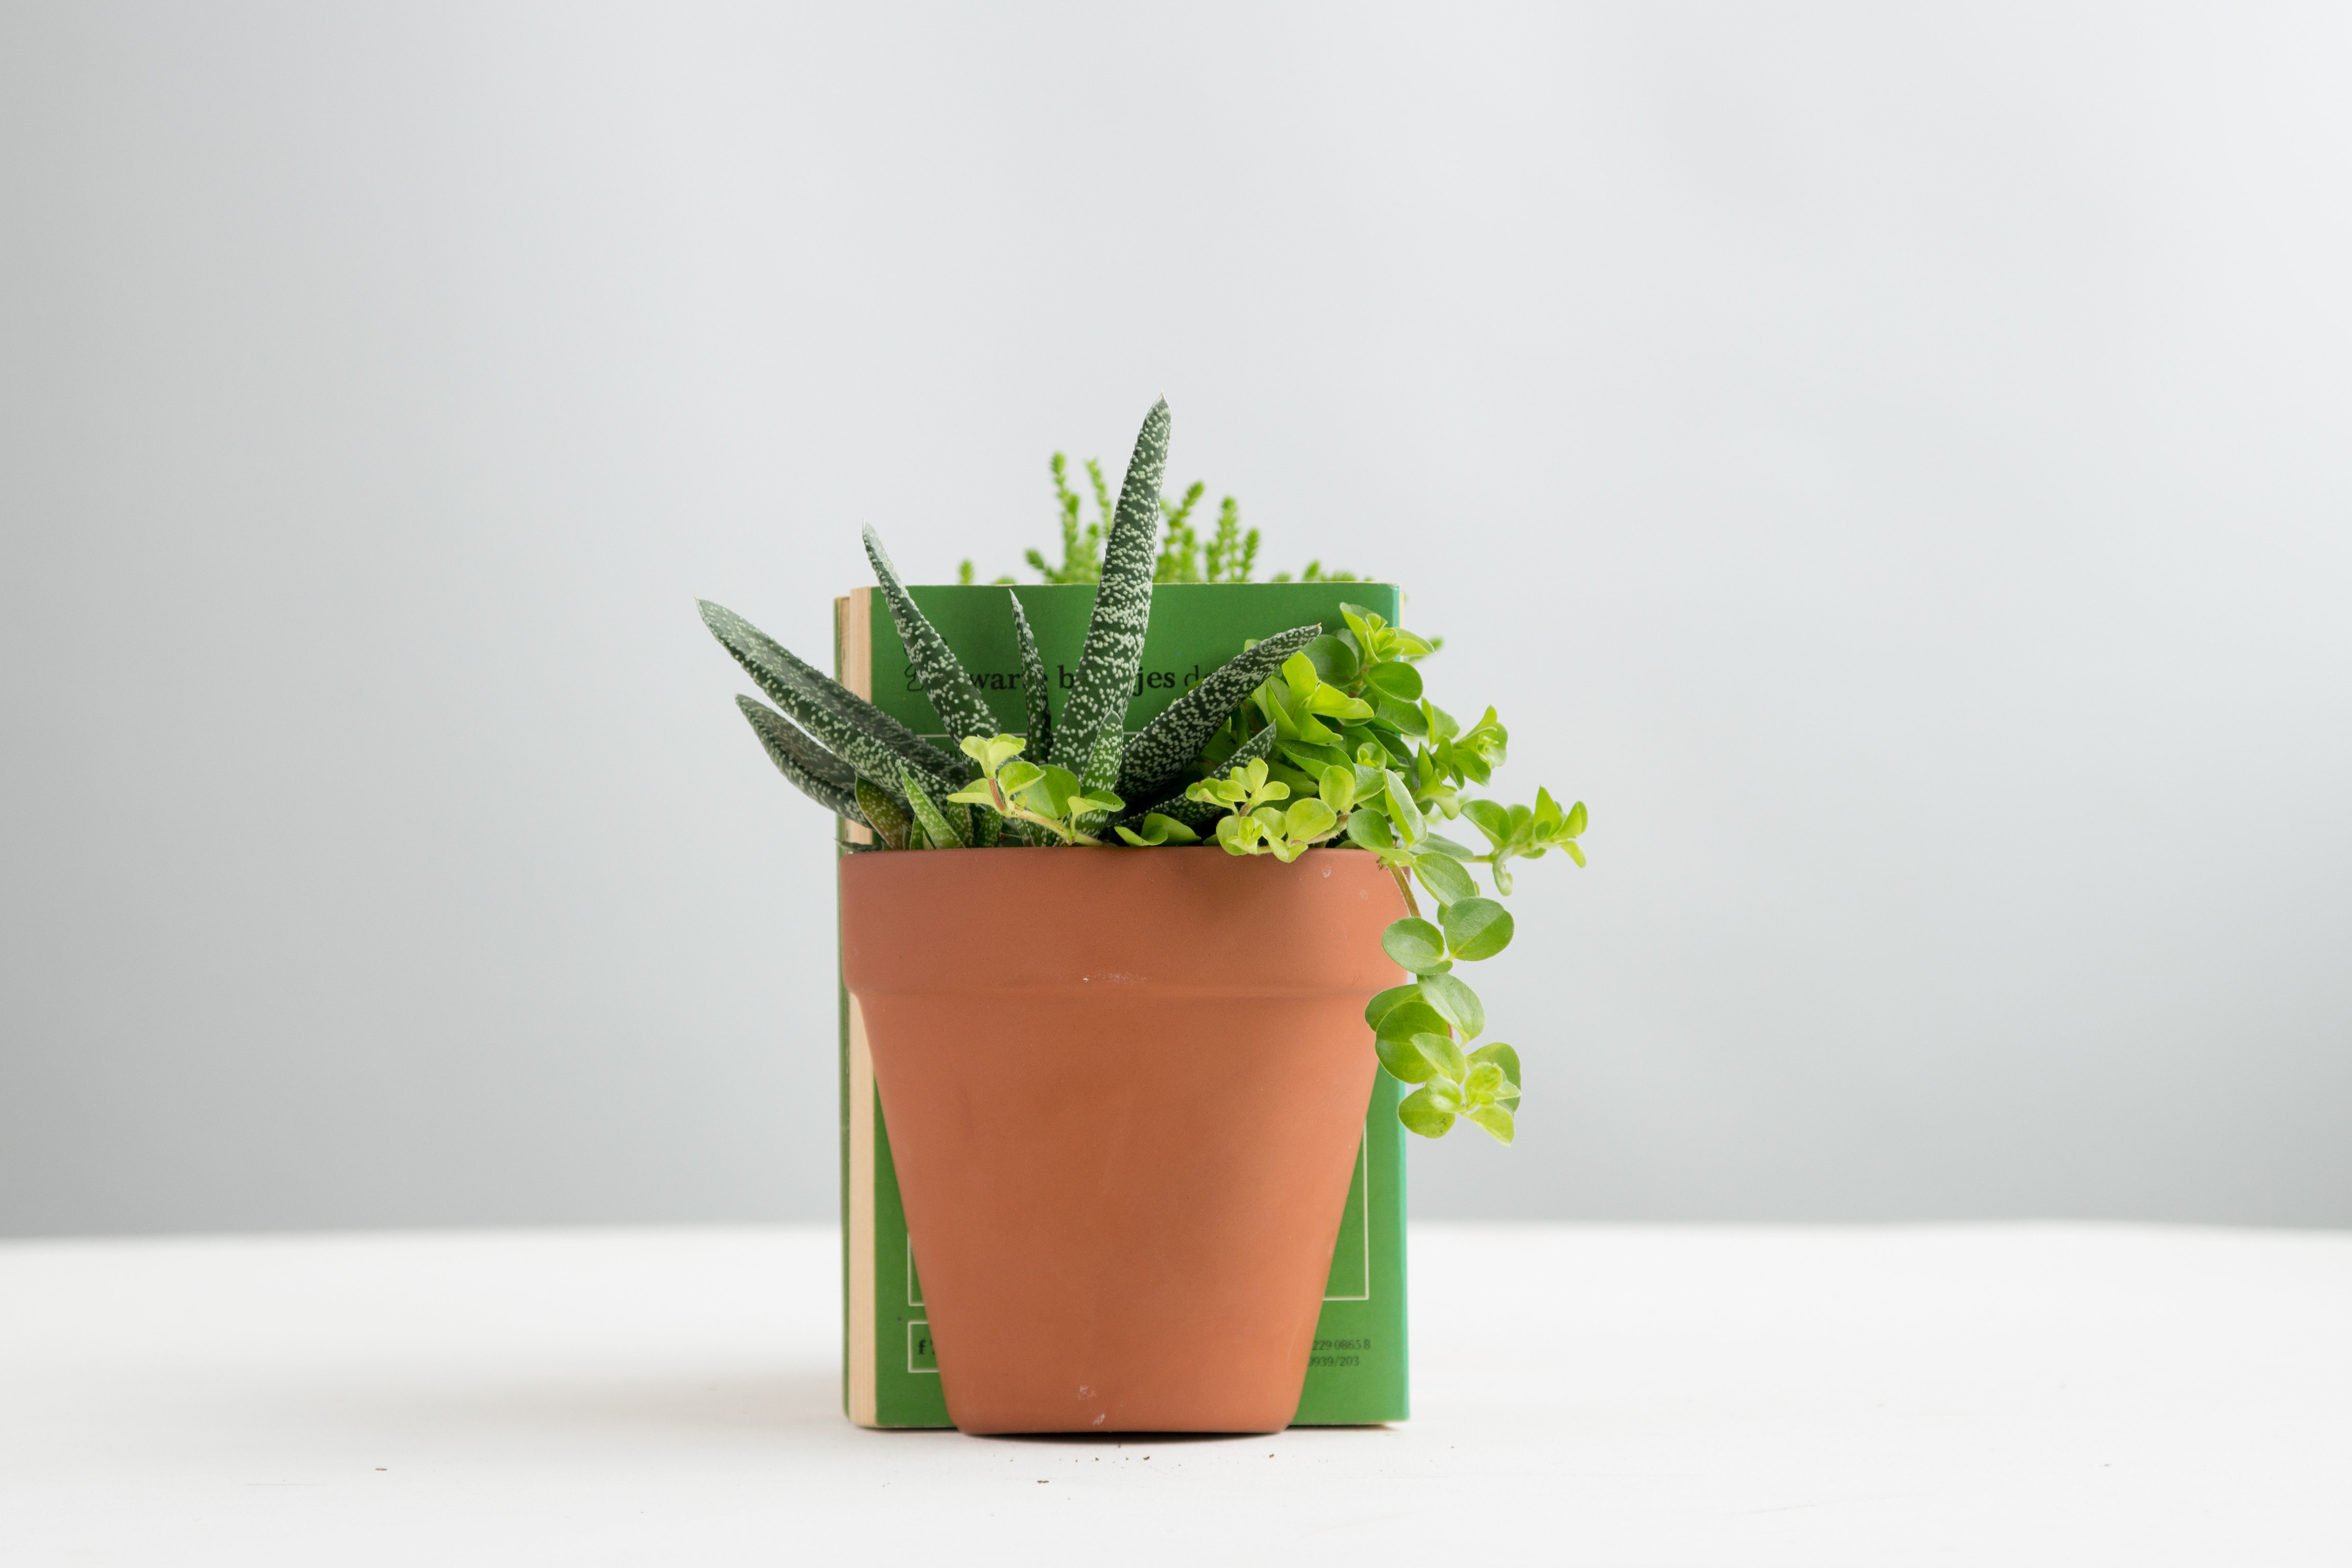 terracotta bookend vase of plant pot bookends content gallery a classic terracotta plant pot pertaining to plant pot bookends high res images click to view alt click to download